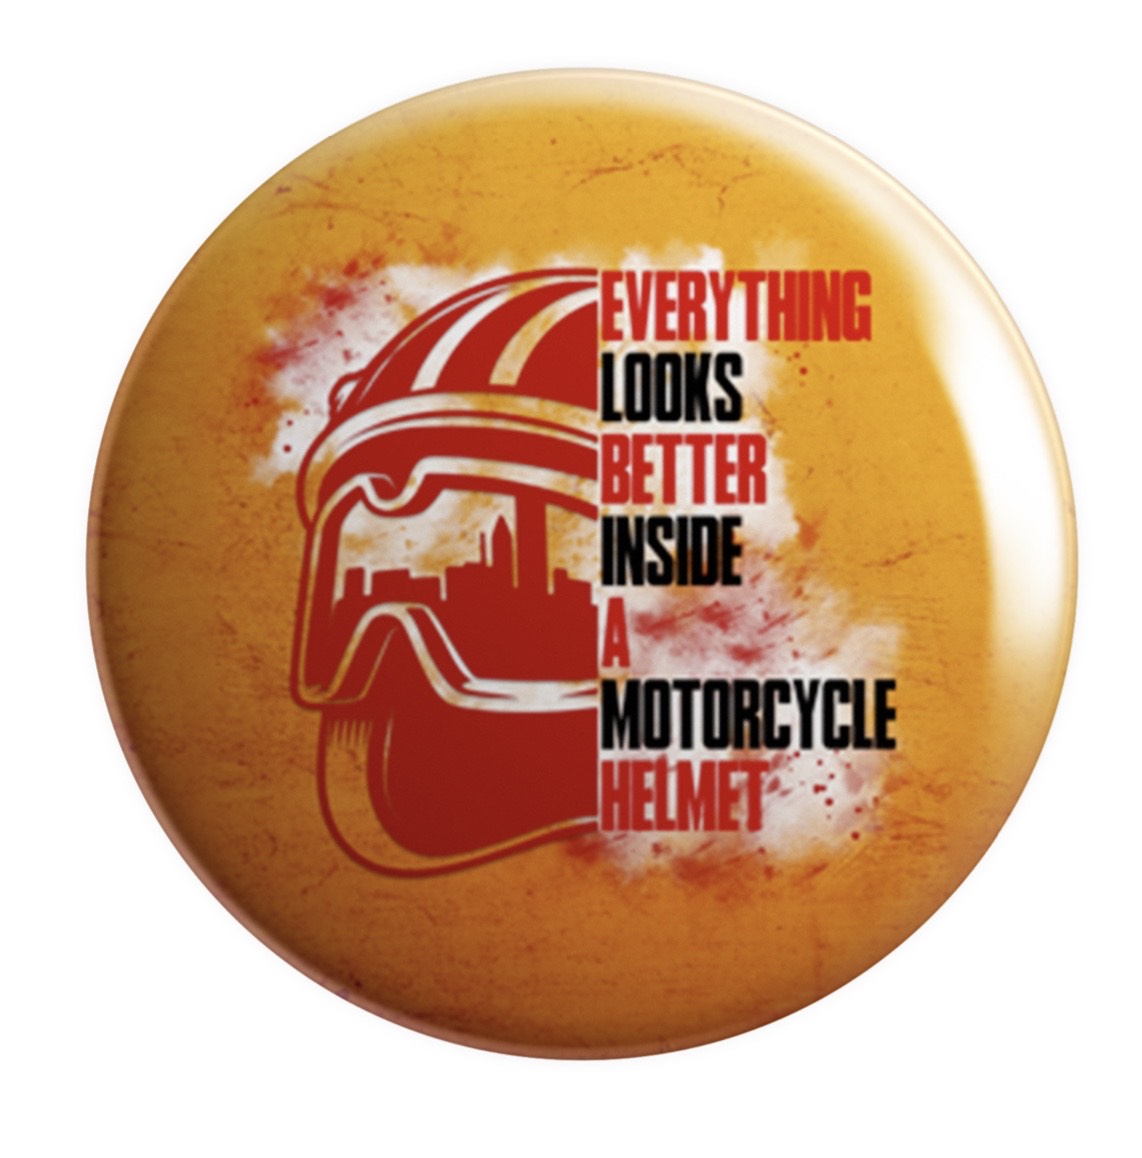 Everything looks better inside motorcycle helmet Button Badge 2pcs